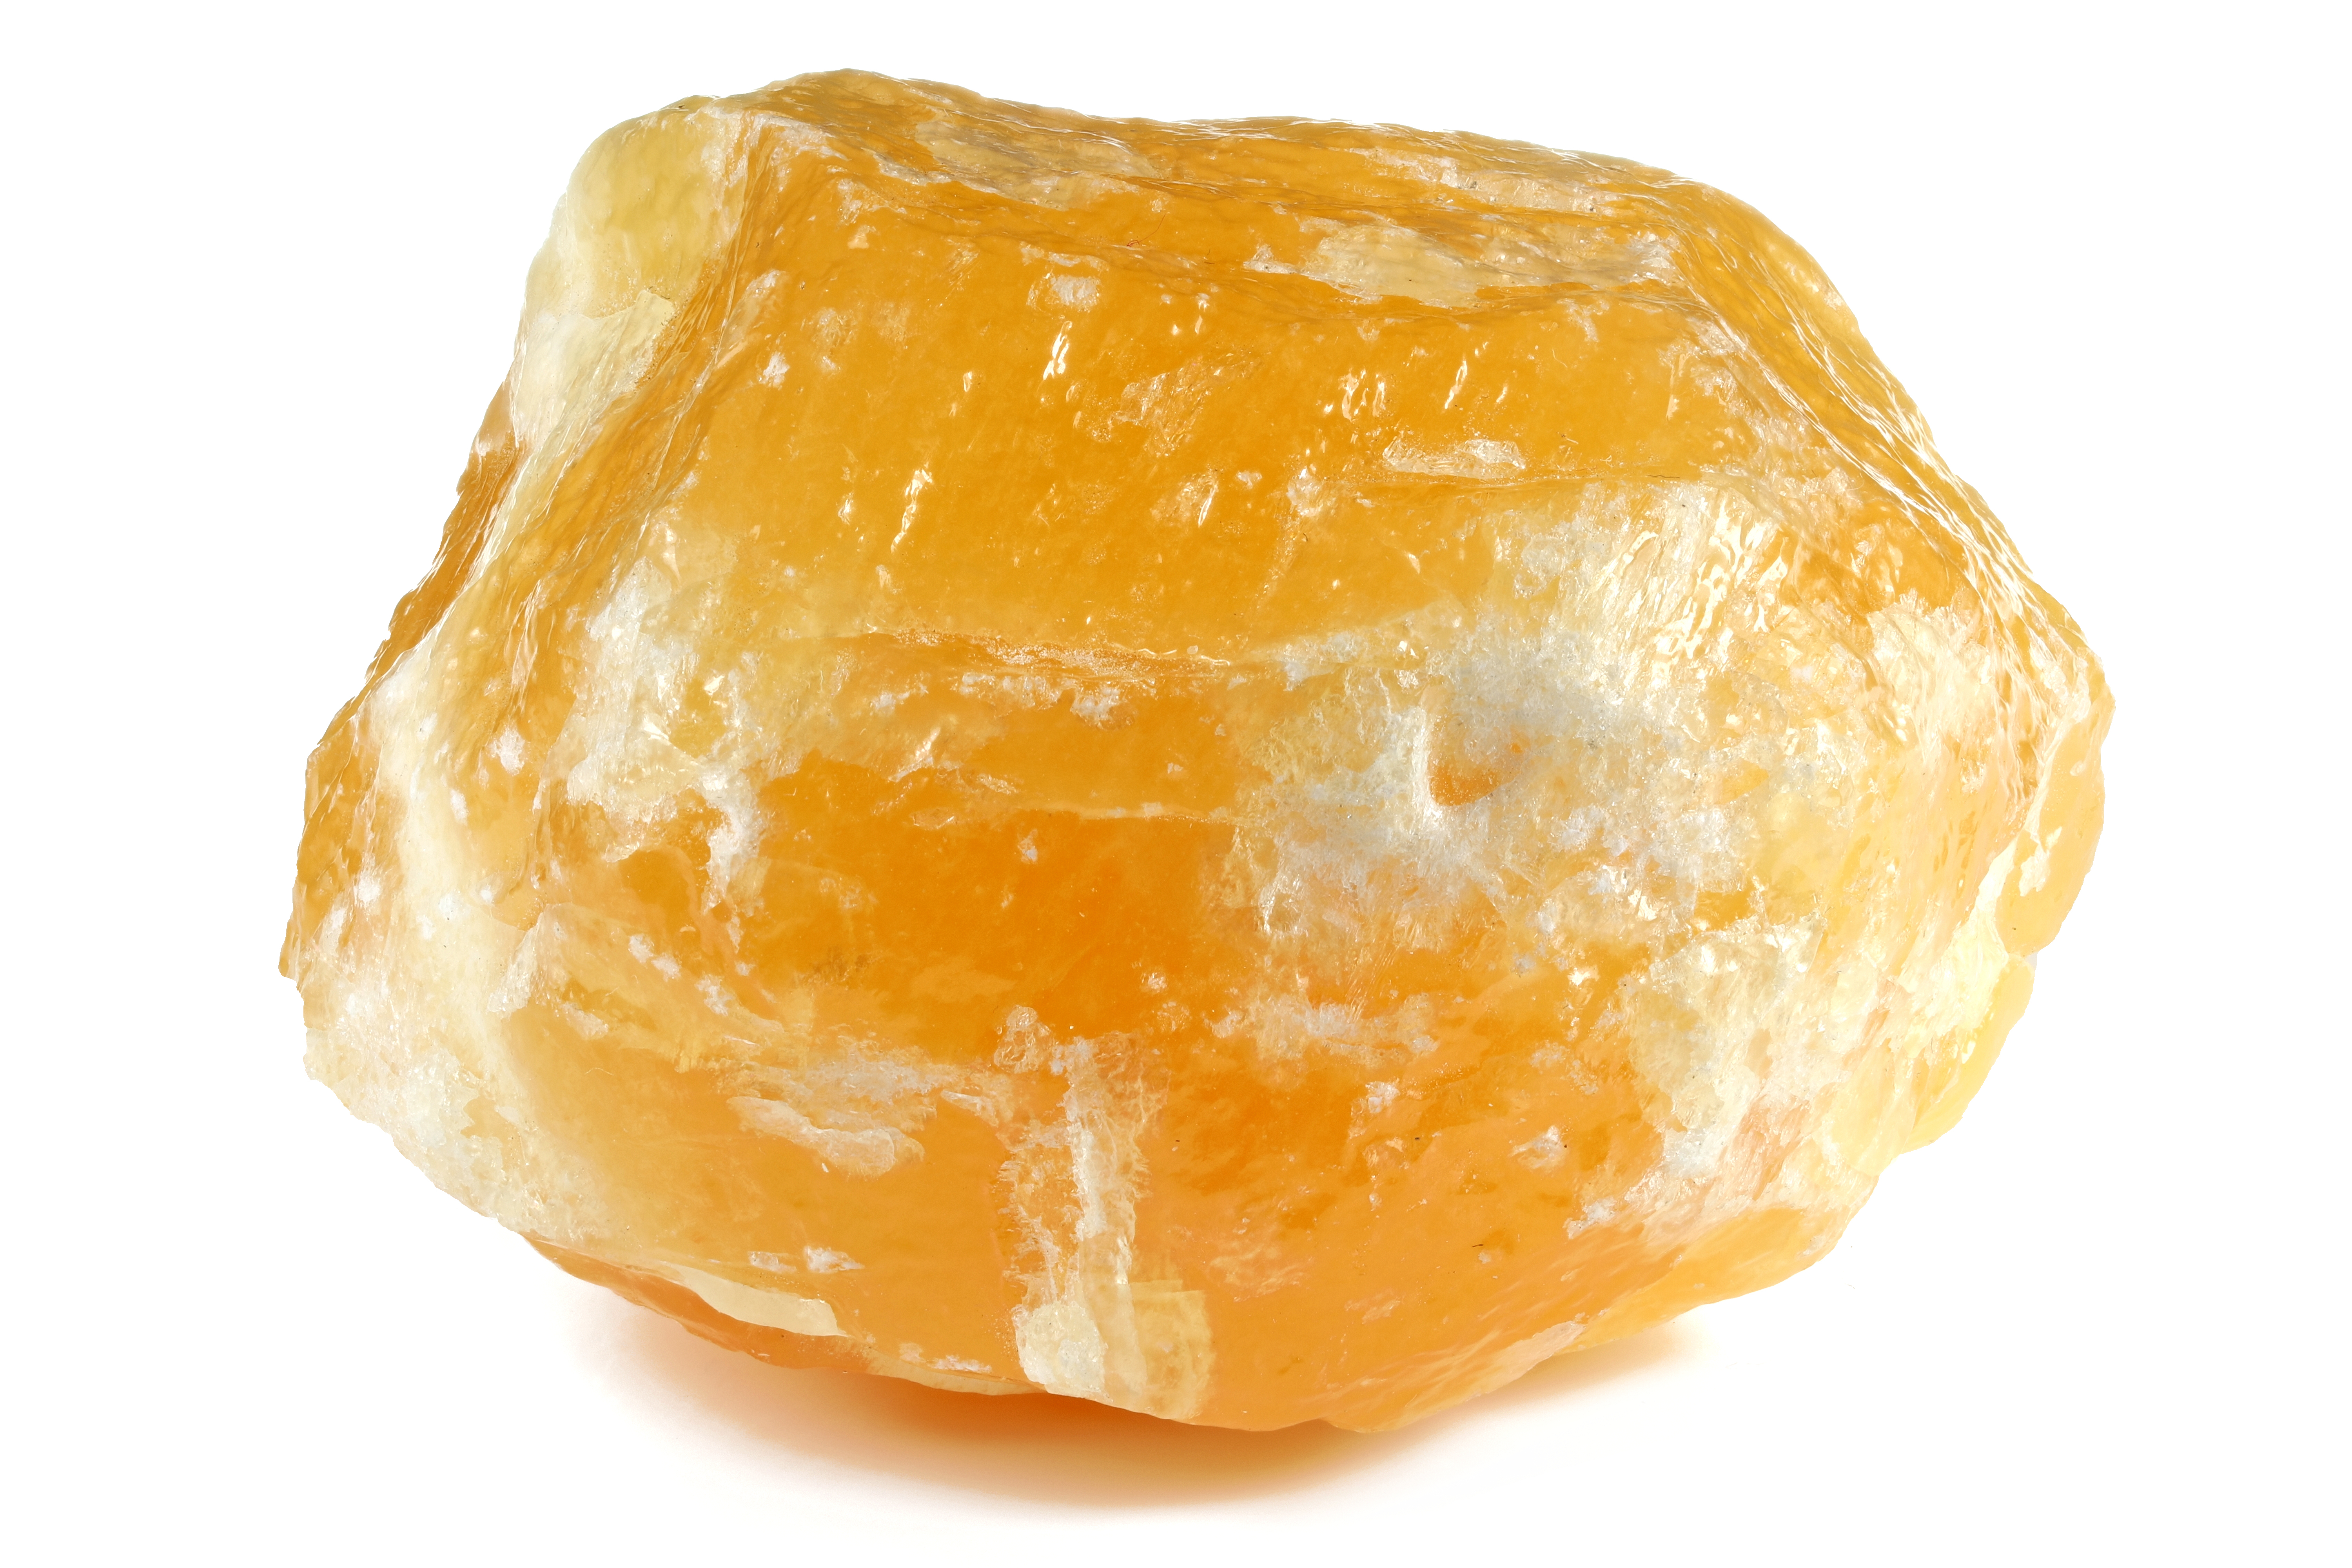 A piece of Orange Calcite on a white background